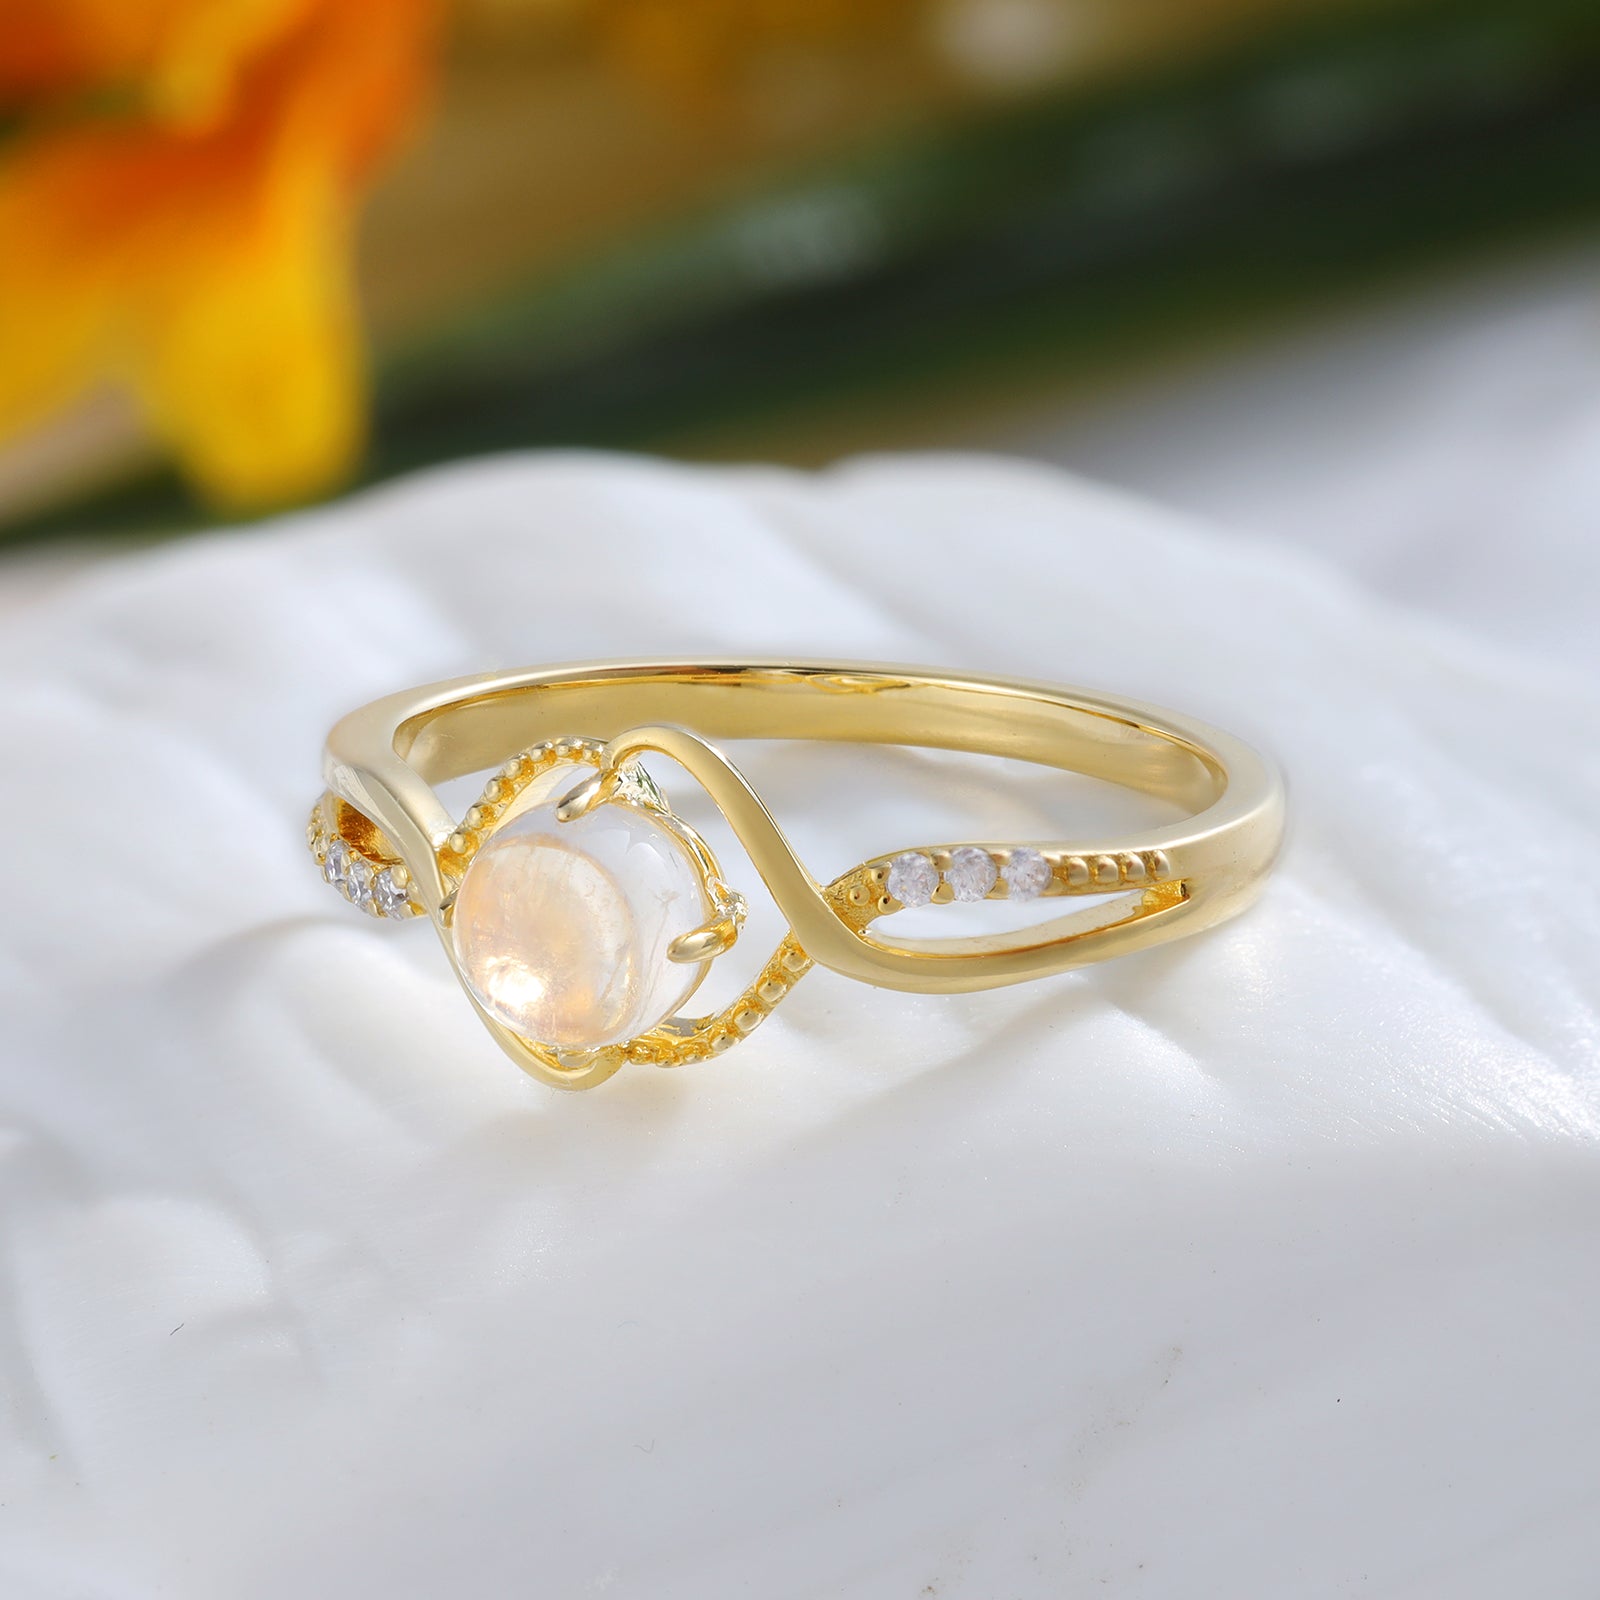 K Gold Moonstone Ring - iYdr